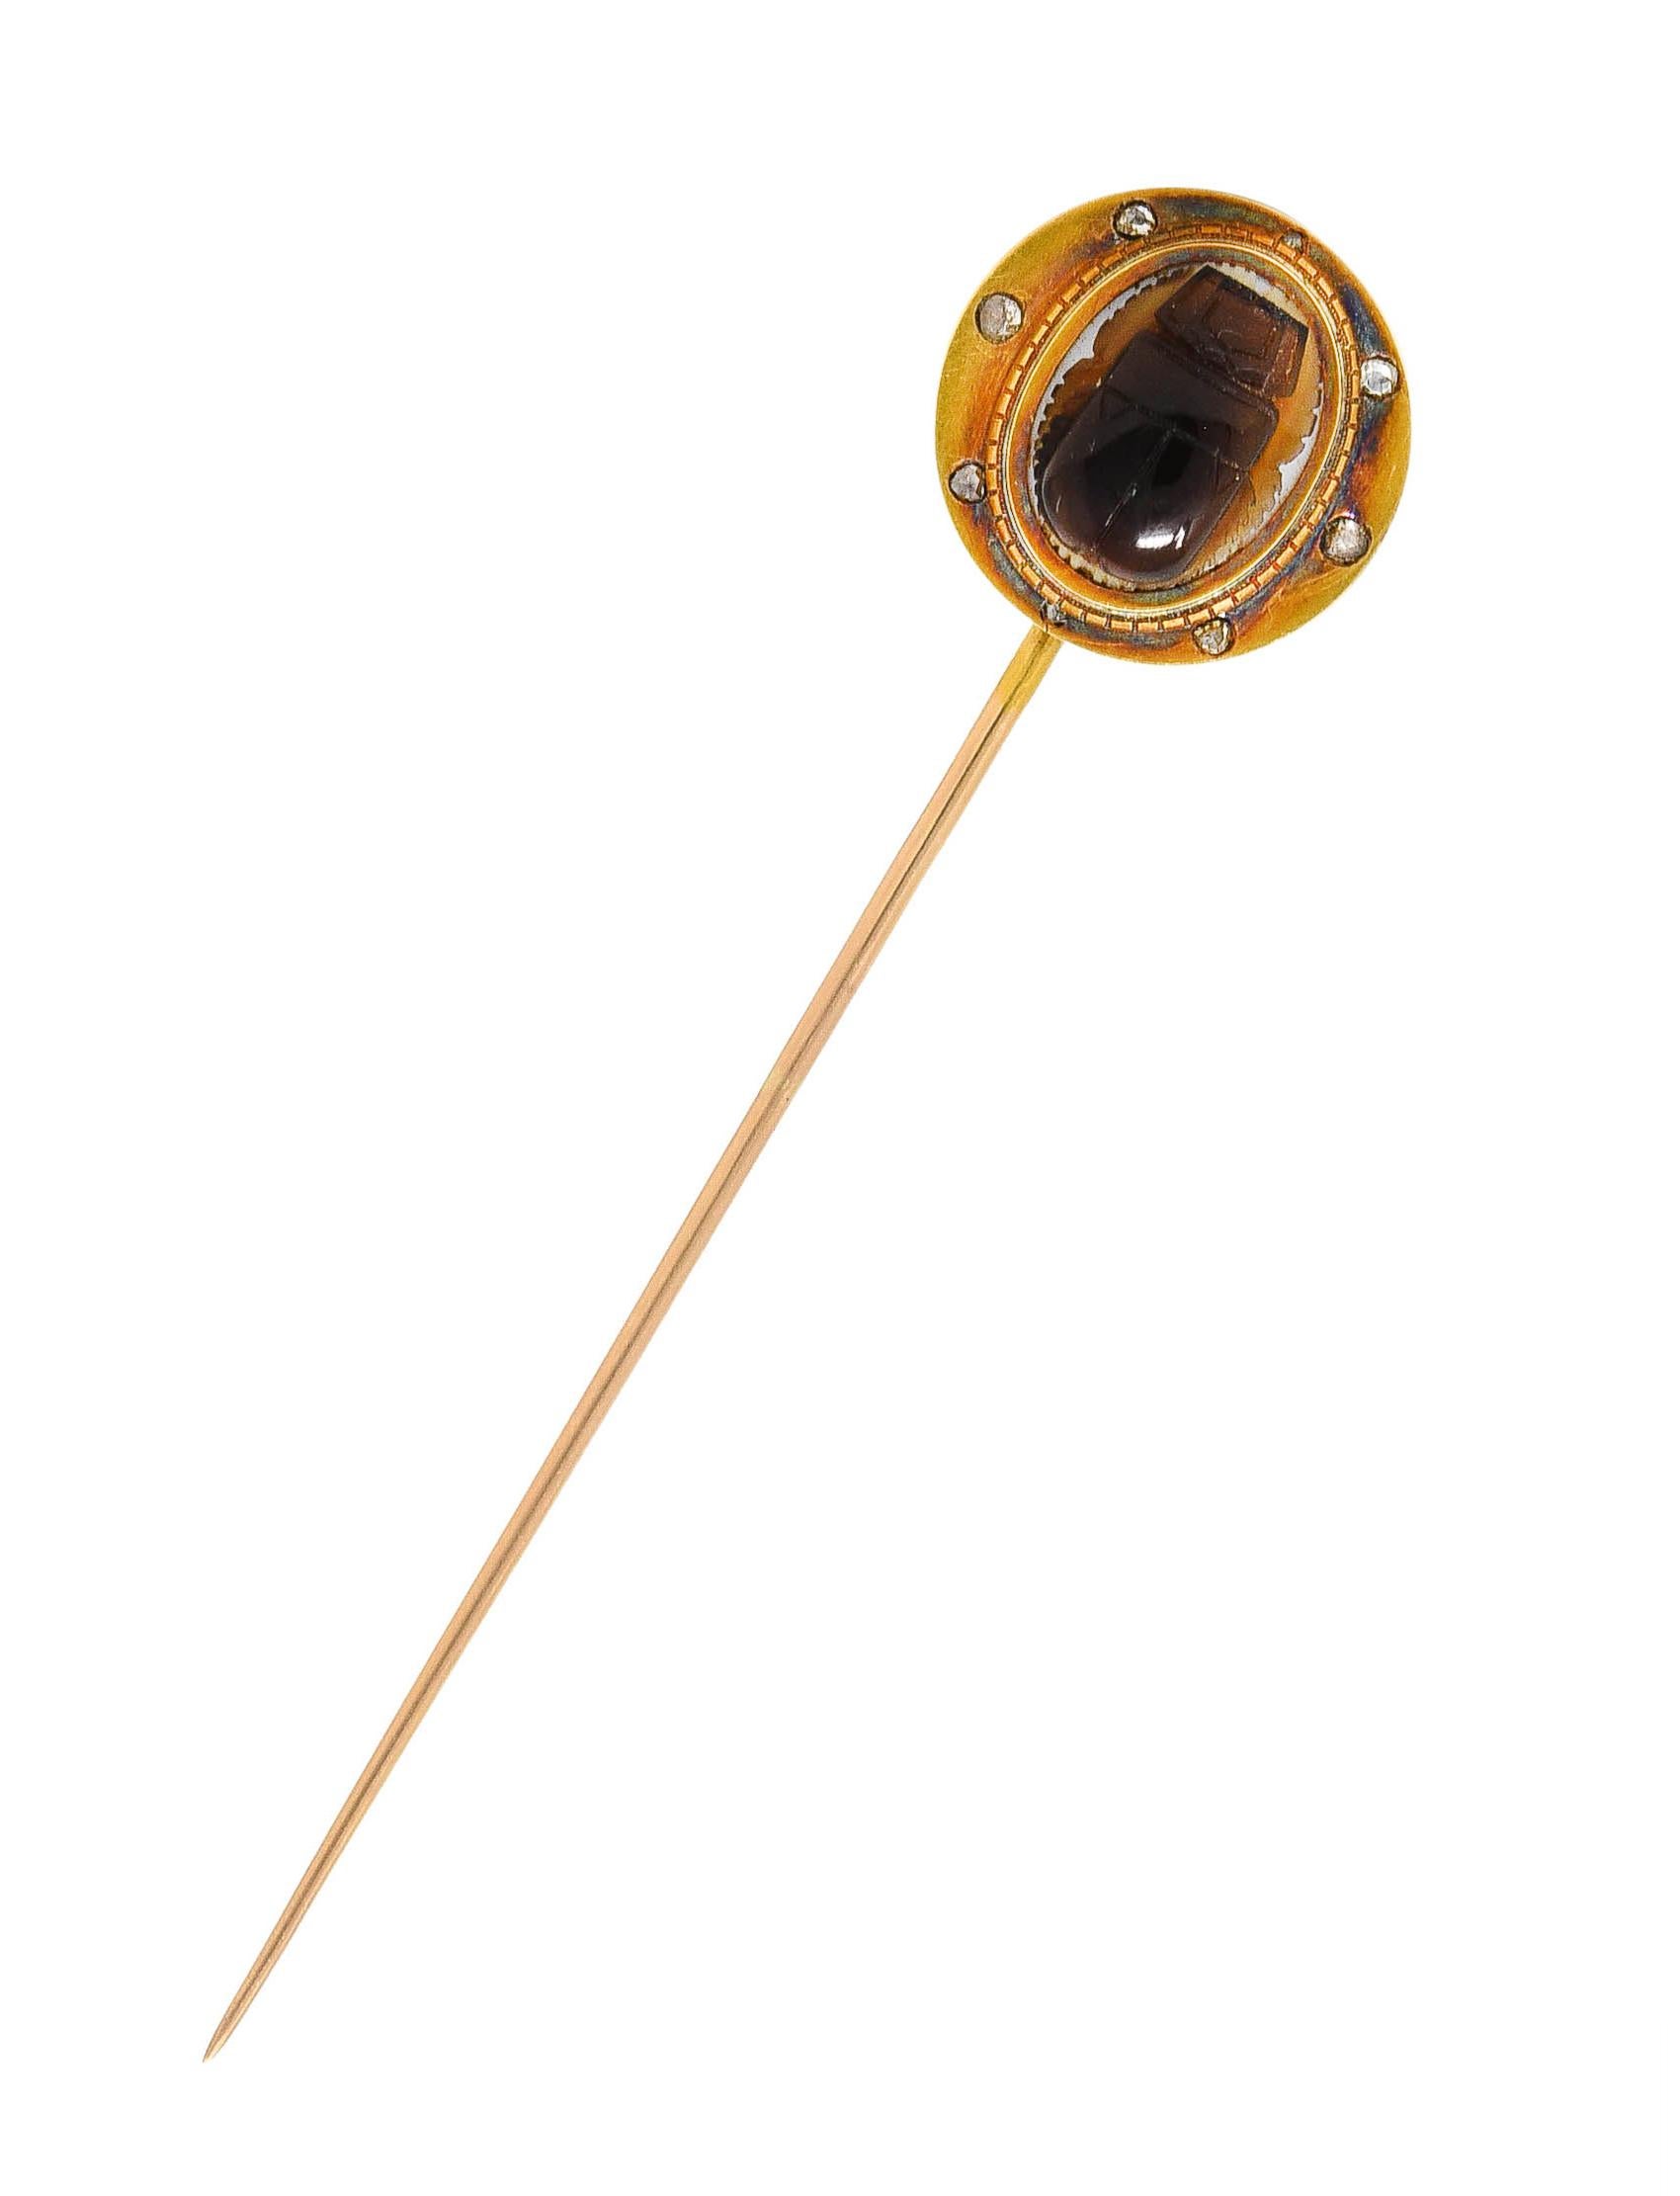 Stickpin centers agate carved to depict a scarab - translucent orangey brown with medium dark saturation

Measuring 9.5 x 12.0 mm - backed by opaque white agate and bezel set

With grooved gold surround accented by flush set rose cut